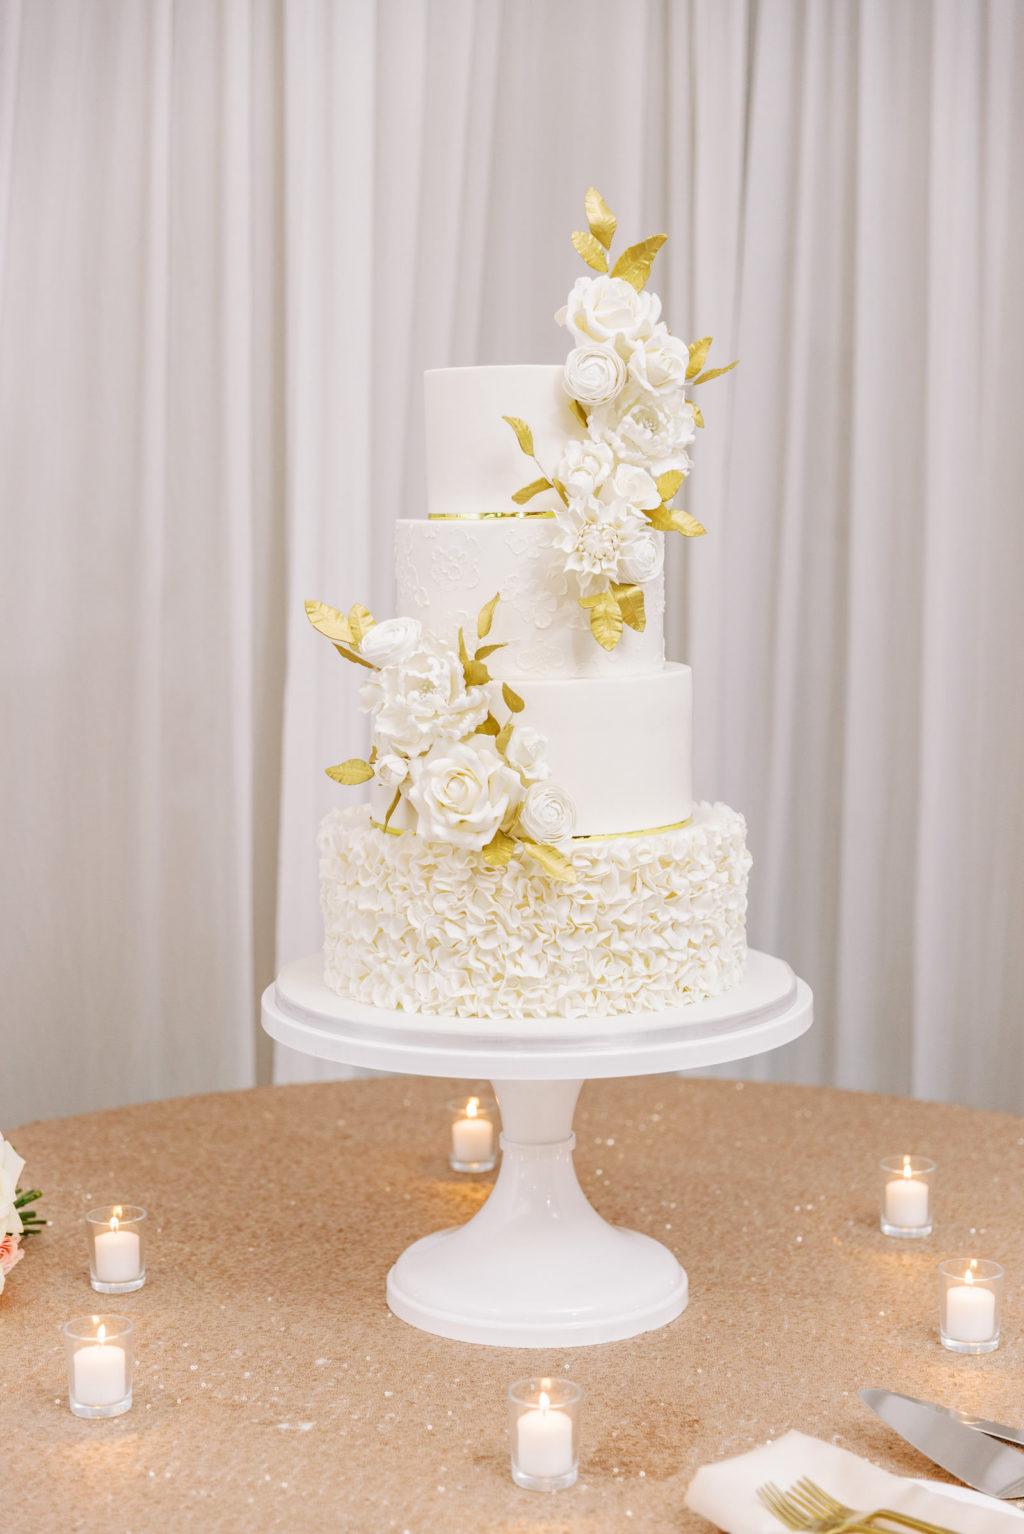 Modern Elegant White Four Tier Wedding Cake with Sugar Roses and Gold Foil Leafs, Gold Sequin Table Linens | Florida Wedding Planner Parties A'La Carte | Tampa Bay Rental Company Over The Top Linen Rentals